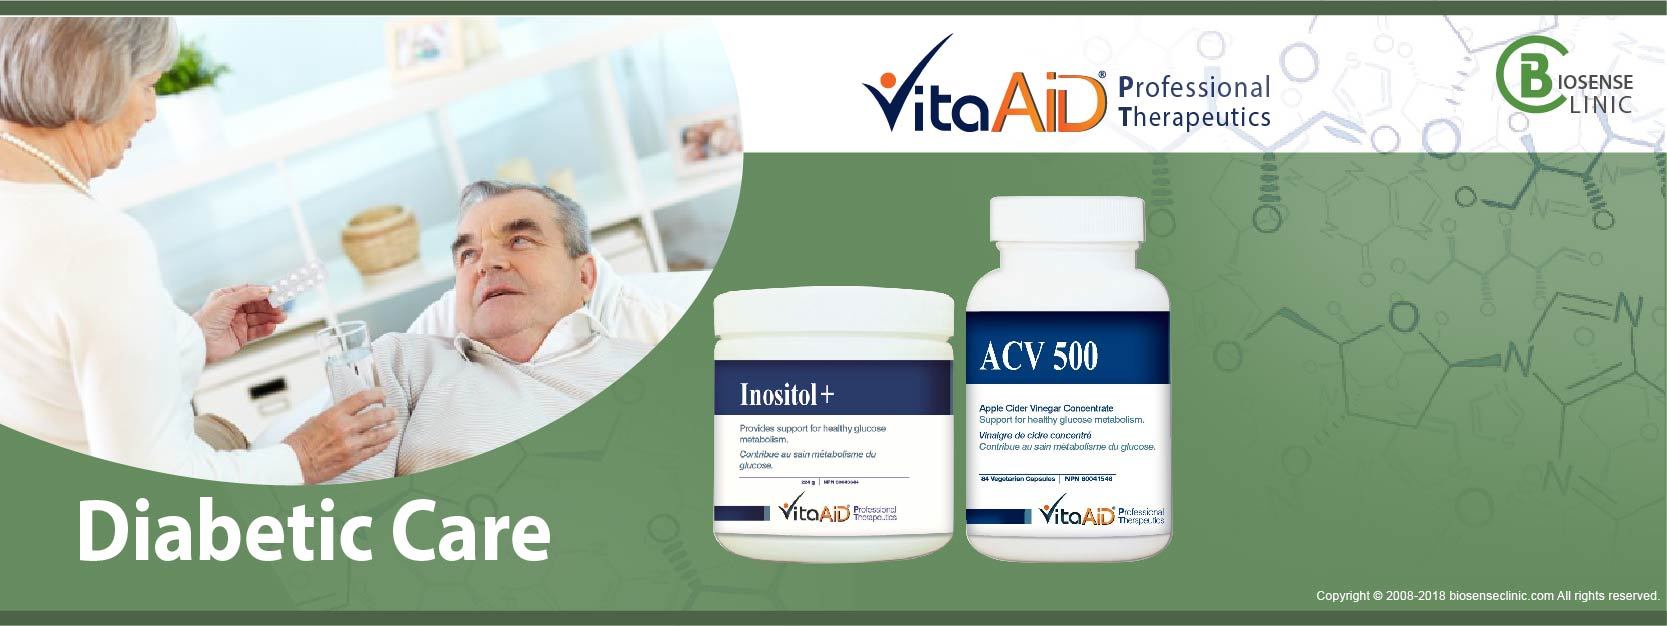 VitaAid category banner diabetic care